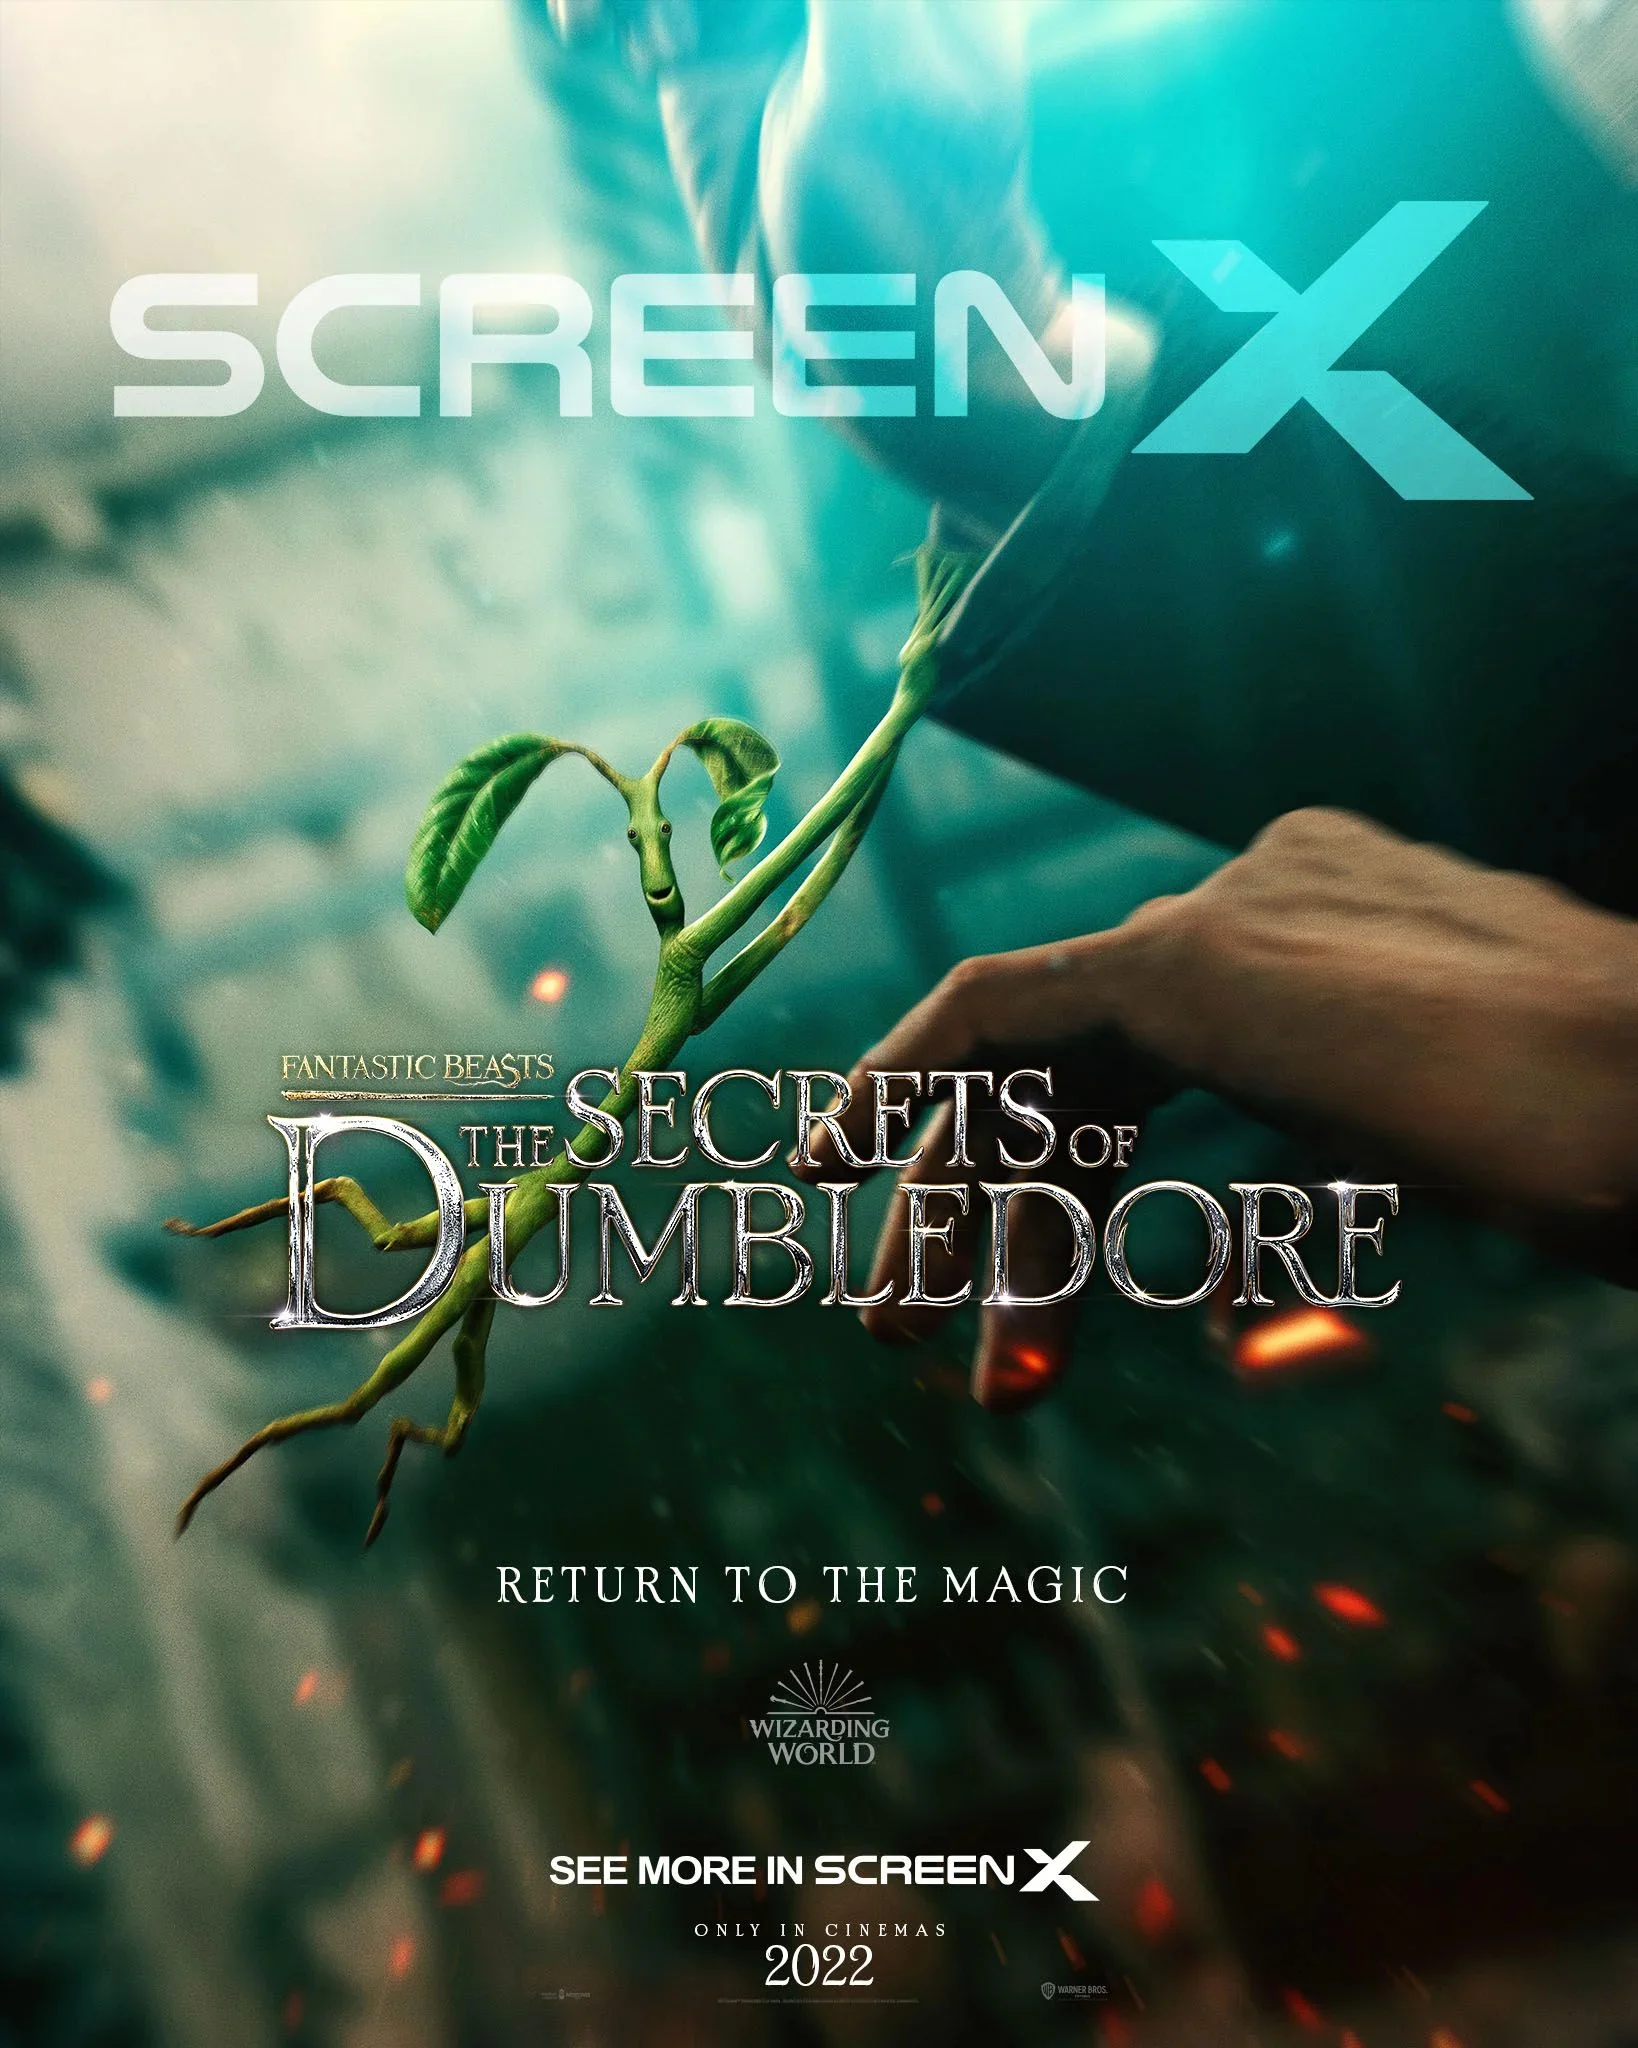 "Fantastic Beasts: The Secrets of Dumbledore" Releases Dolby Cinema, 4DX, ScreenX, D-Box Multi-Format Posters